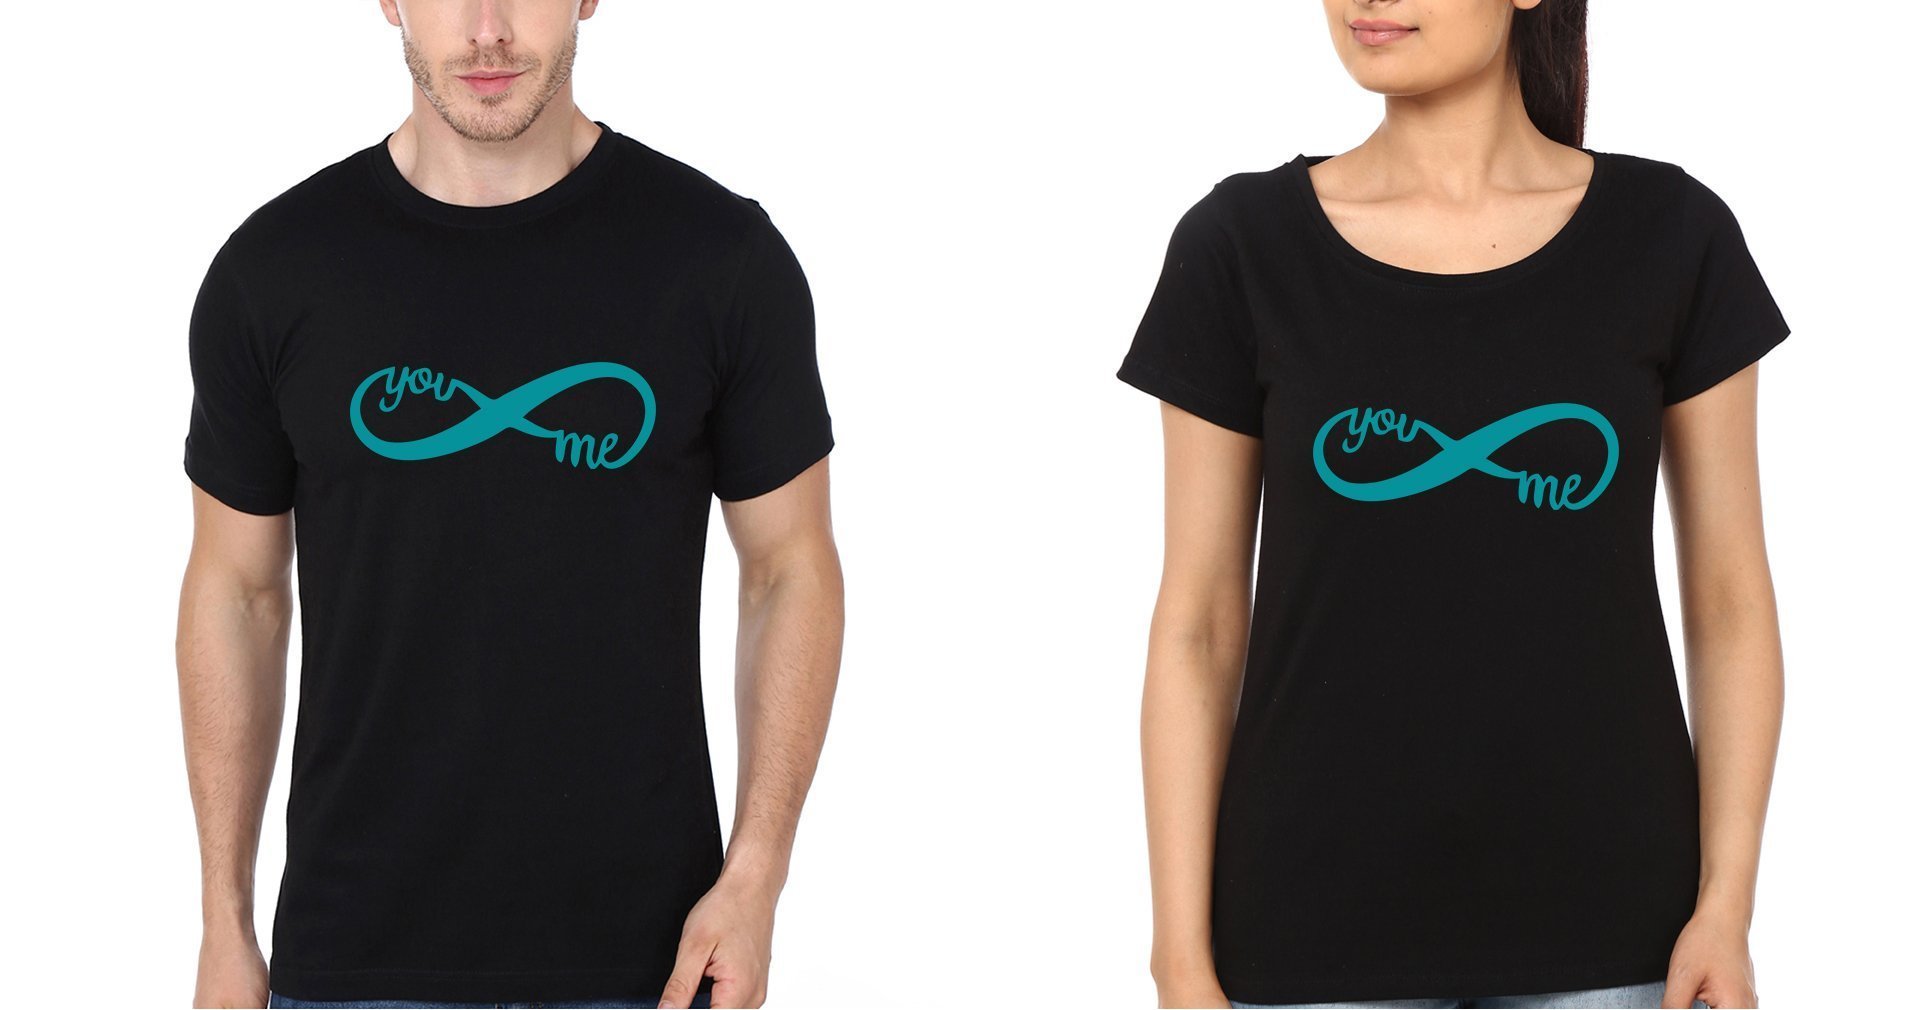 You And Me Couple Half Sleeves T-Shirts -FunkyTees - Funky Tees Club